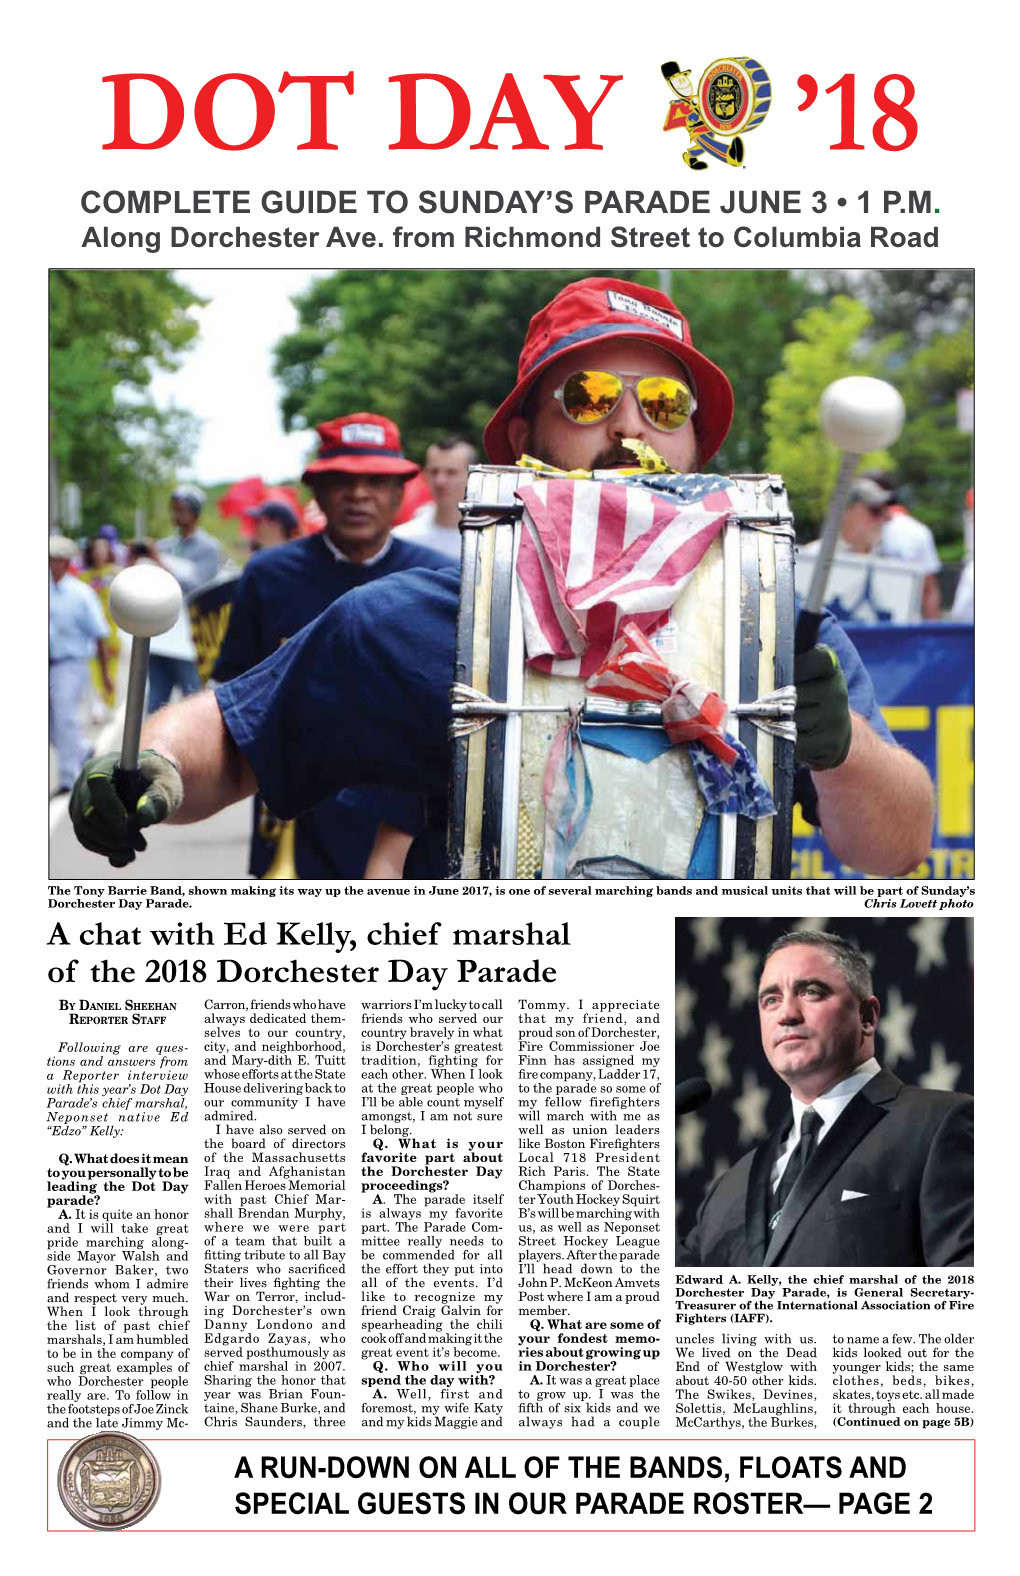 A Chat with Ed Kelly, Chief Marshal of the 2018 Dorchester Day Parade